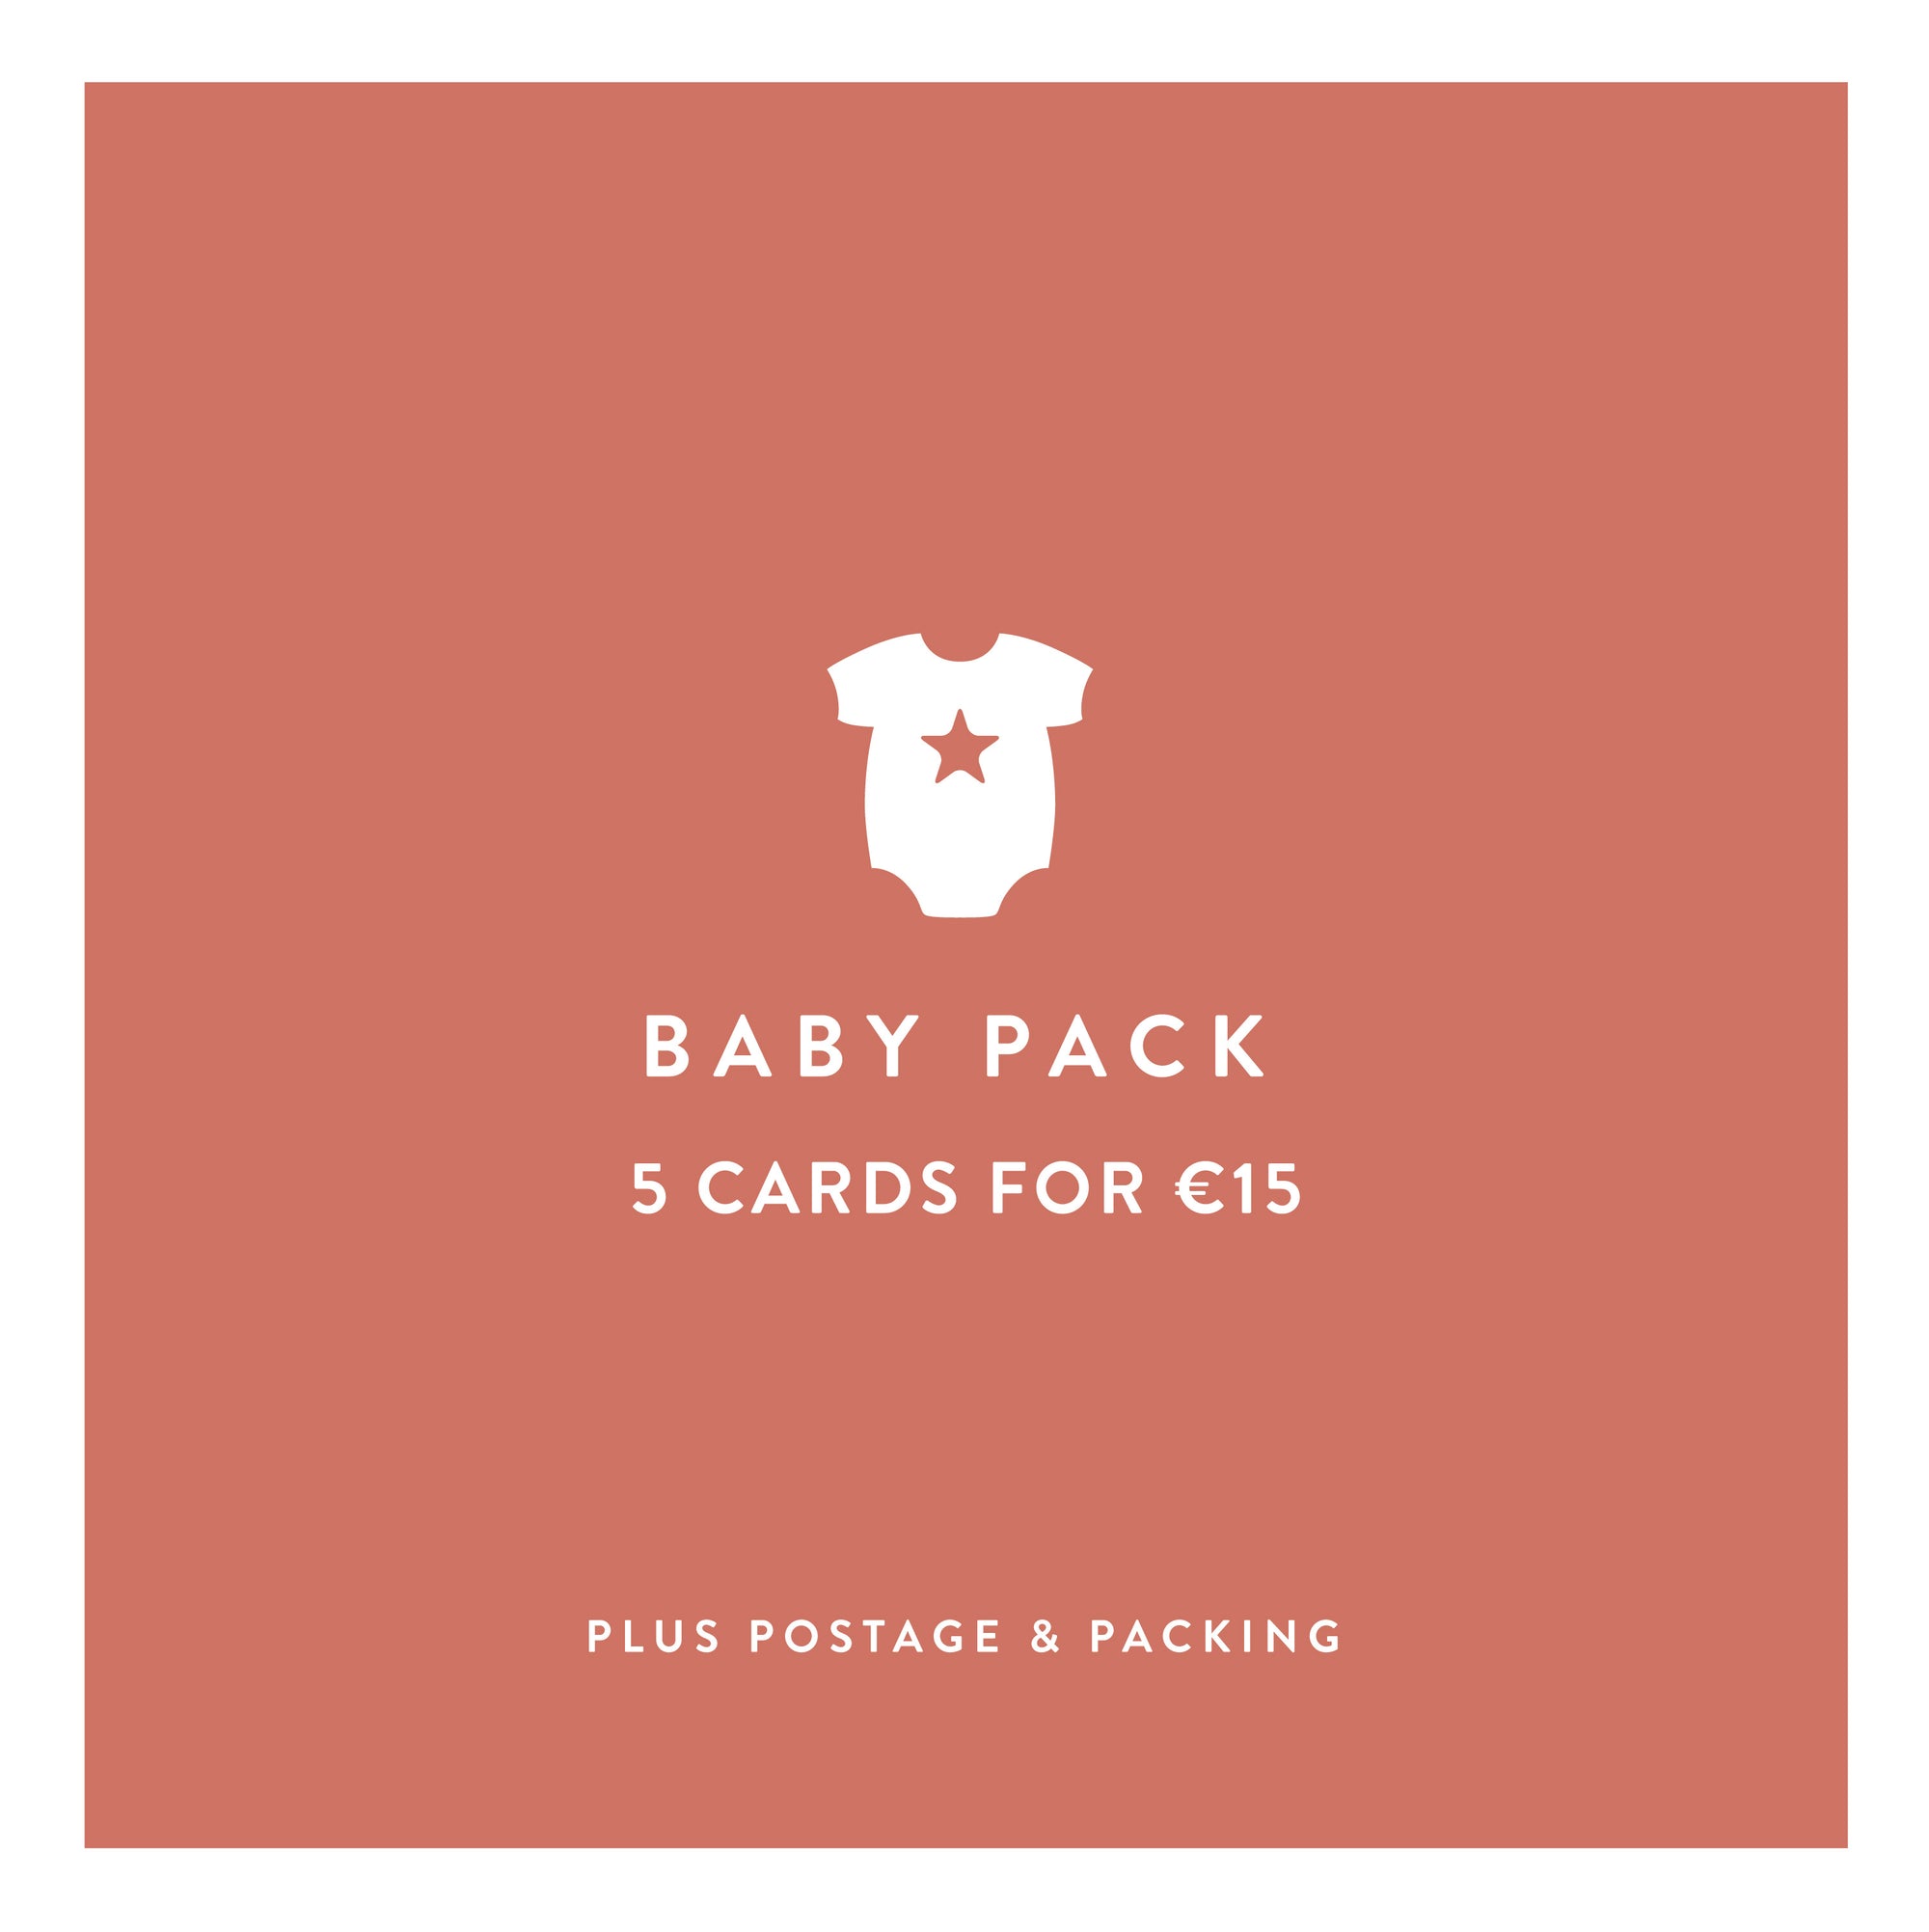 Baby pack - 5 cards for €15